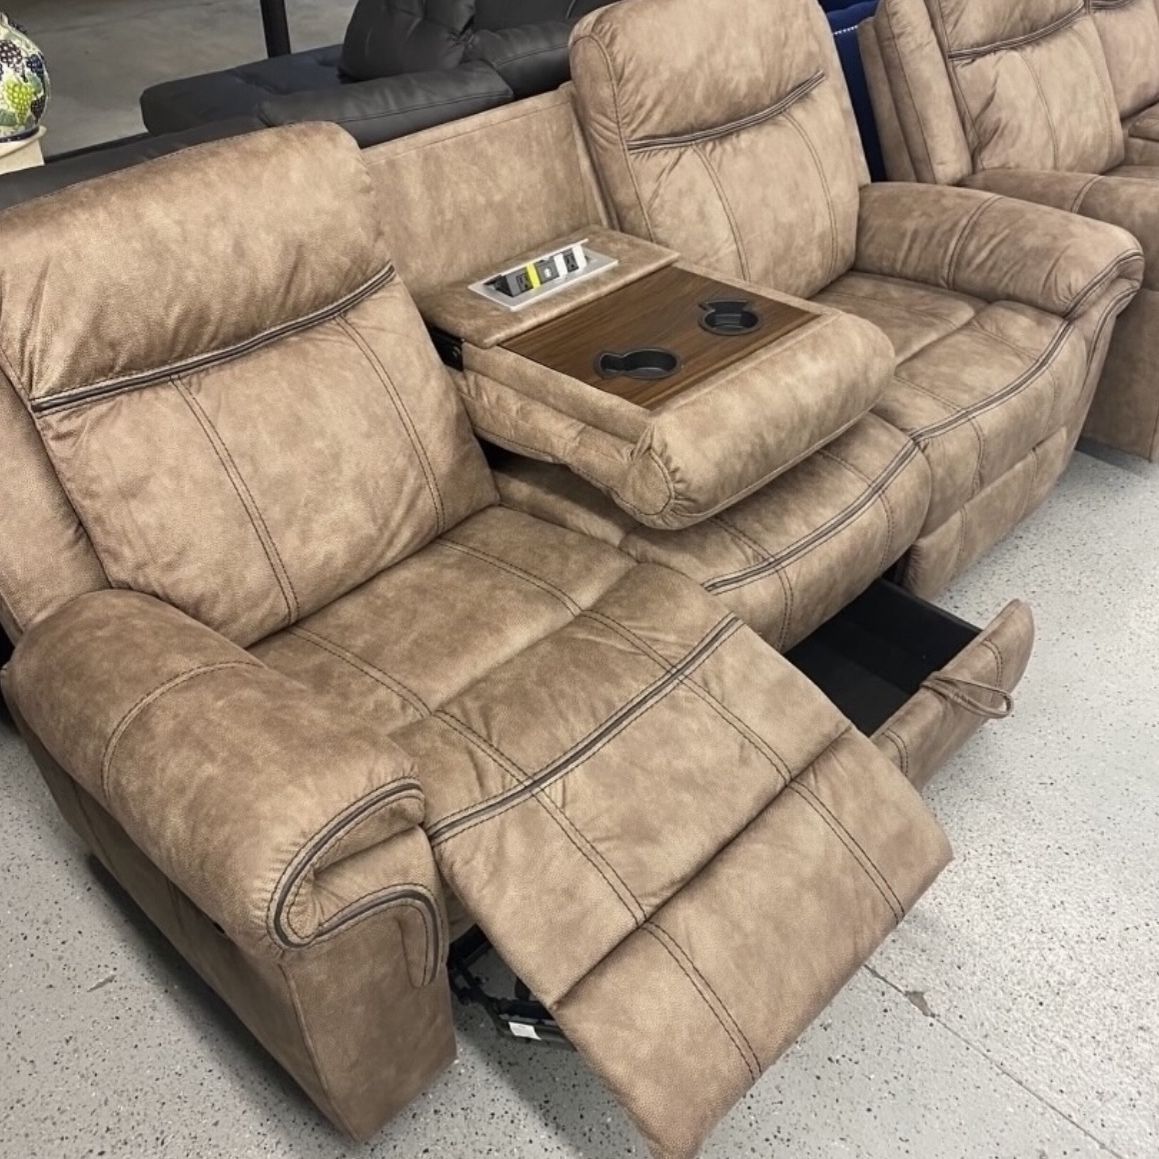 Furniture, Sofa, Sectional Chair, Recliner, Couch, Rug, Carpet Patio